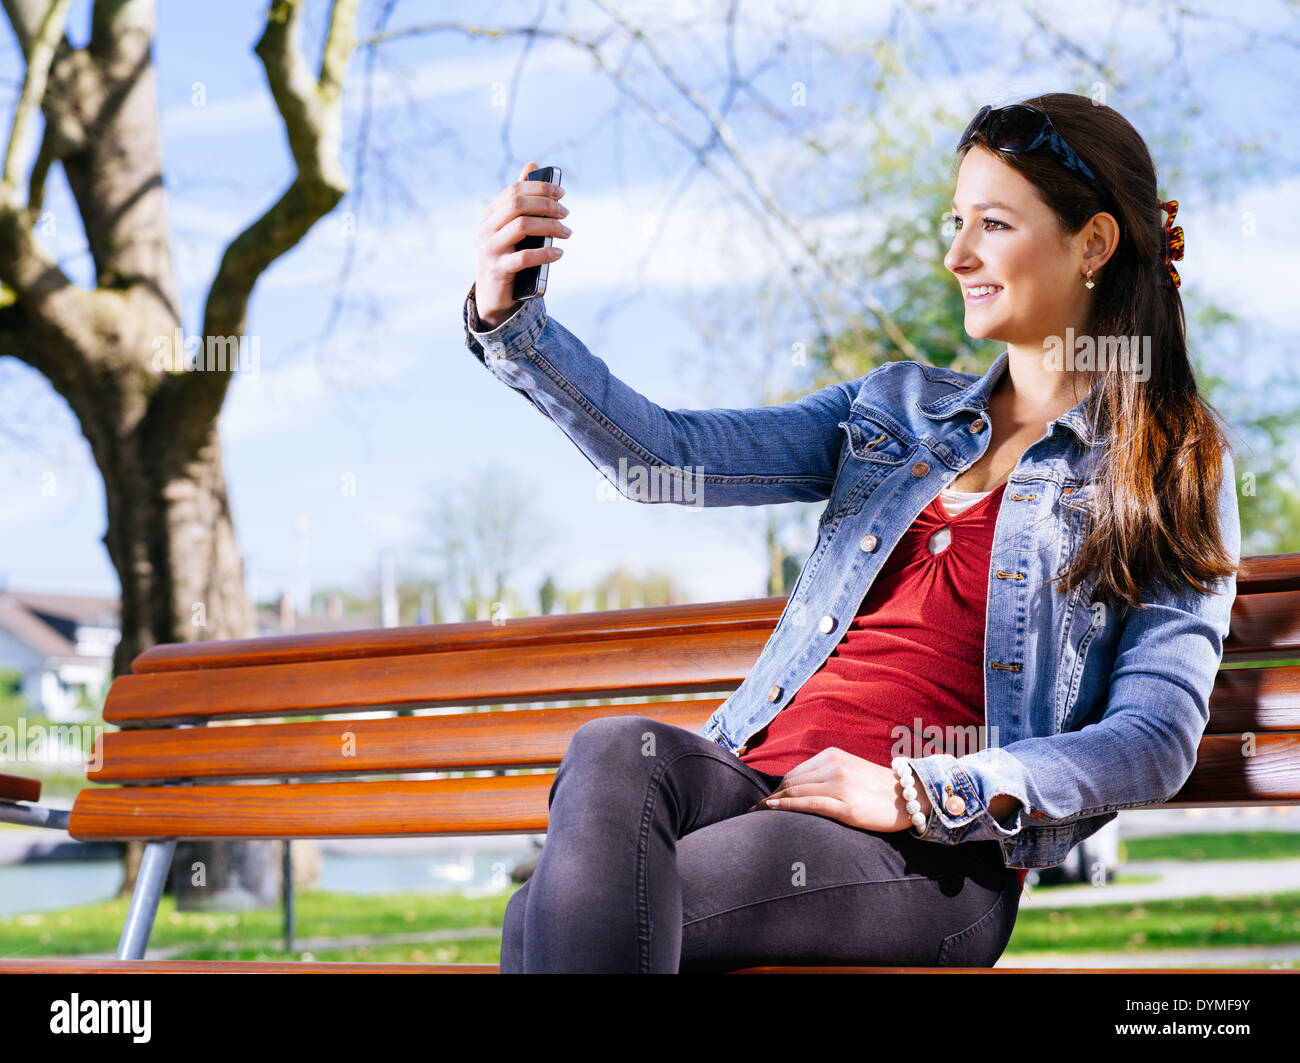 Photo of a beautiful young woman using a smartphone to take a selfie. Stock Photo